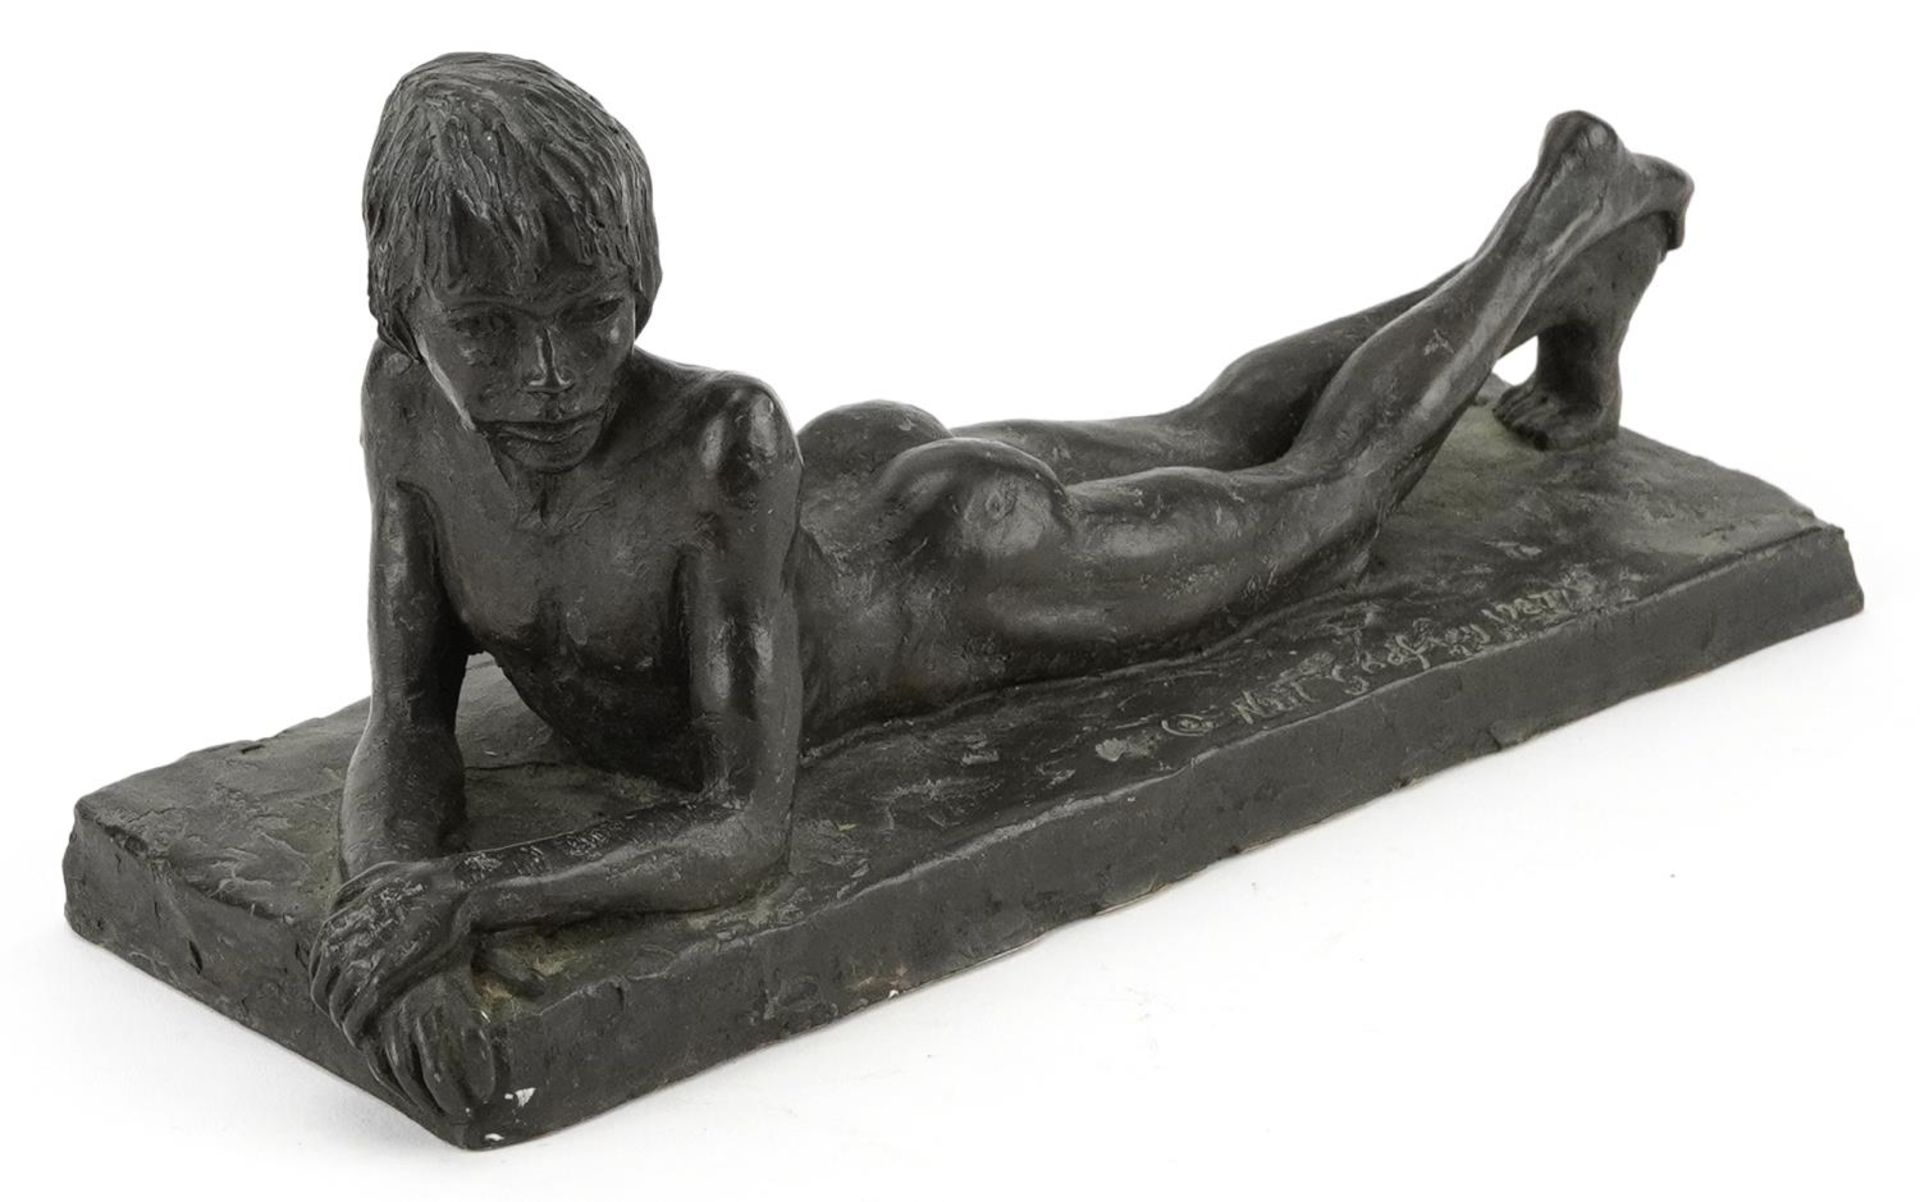 Neil Godfrey 1987, 1980s cold cast bronze statue of a nude young boy, 27cm in length